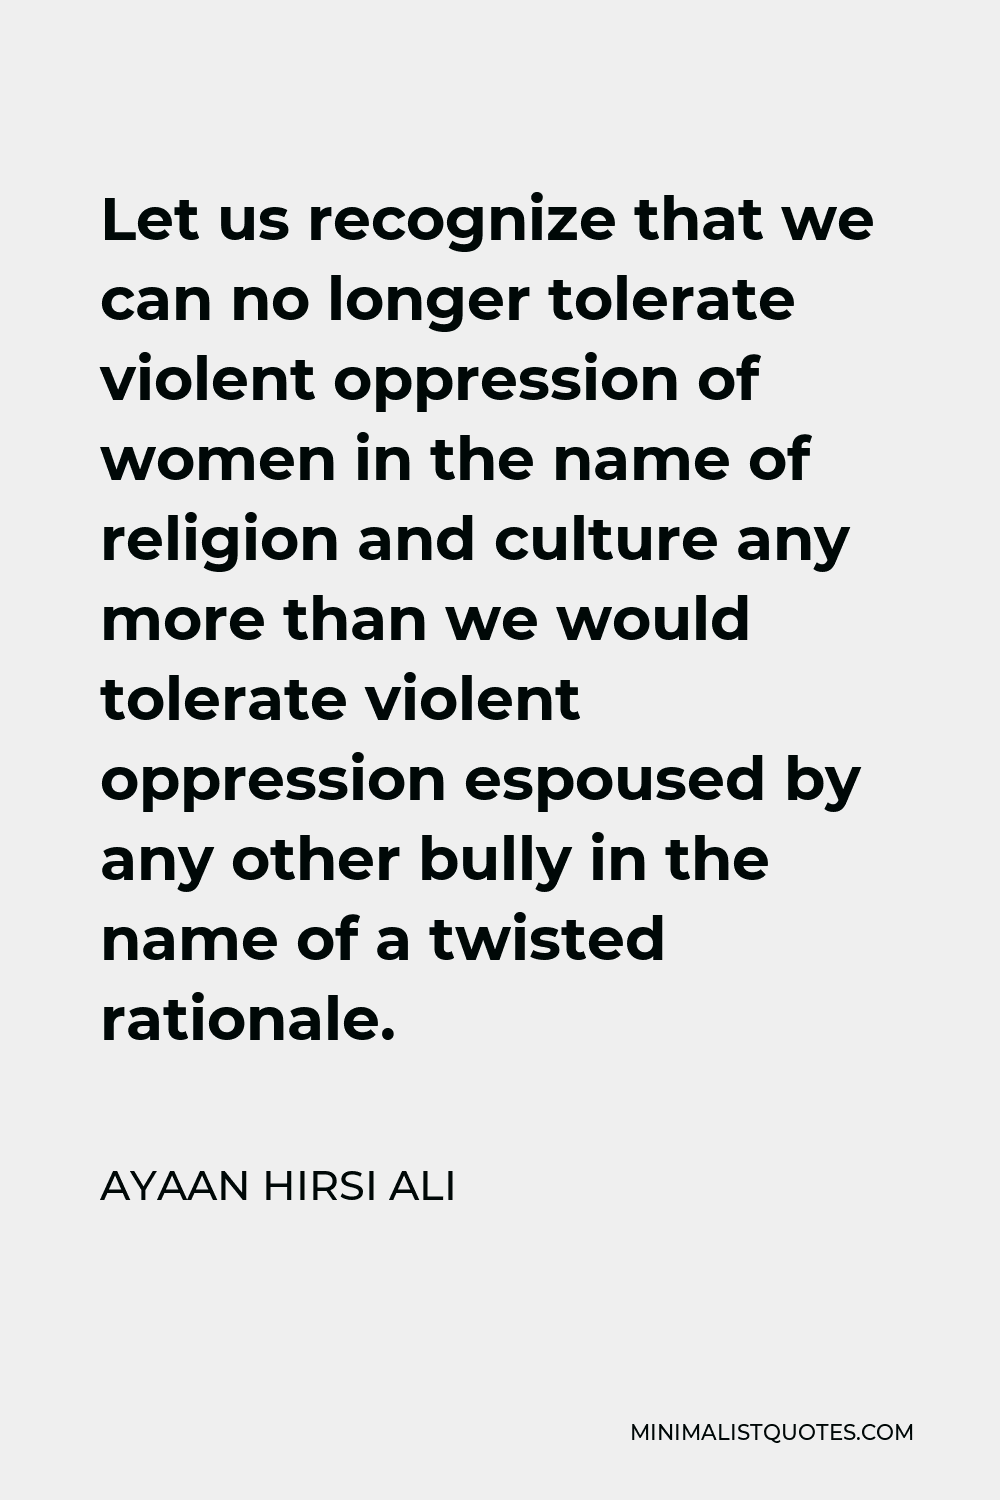 Ayaan Hirsi Ali Quote - Let us recognize that we can no longer tolerate violent oppression of women in the name of religion and culture any more than we would tolerate violent oppression espoused by any other bully in the name of a twisted rationale.